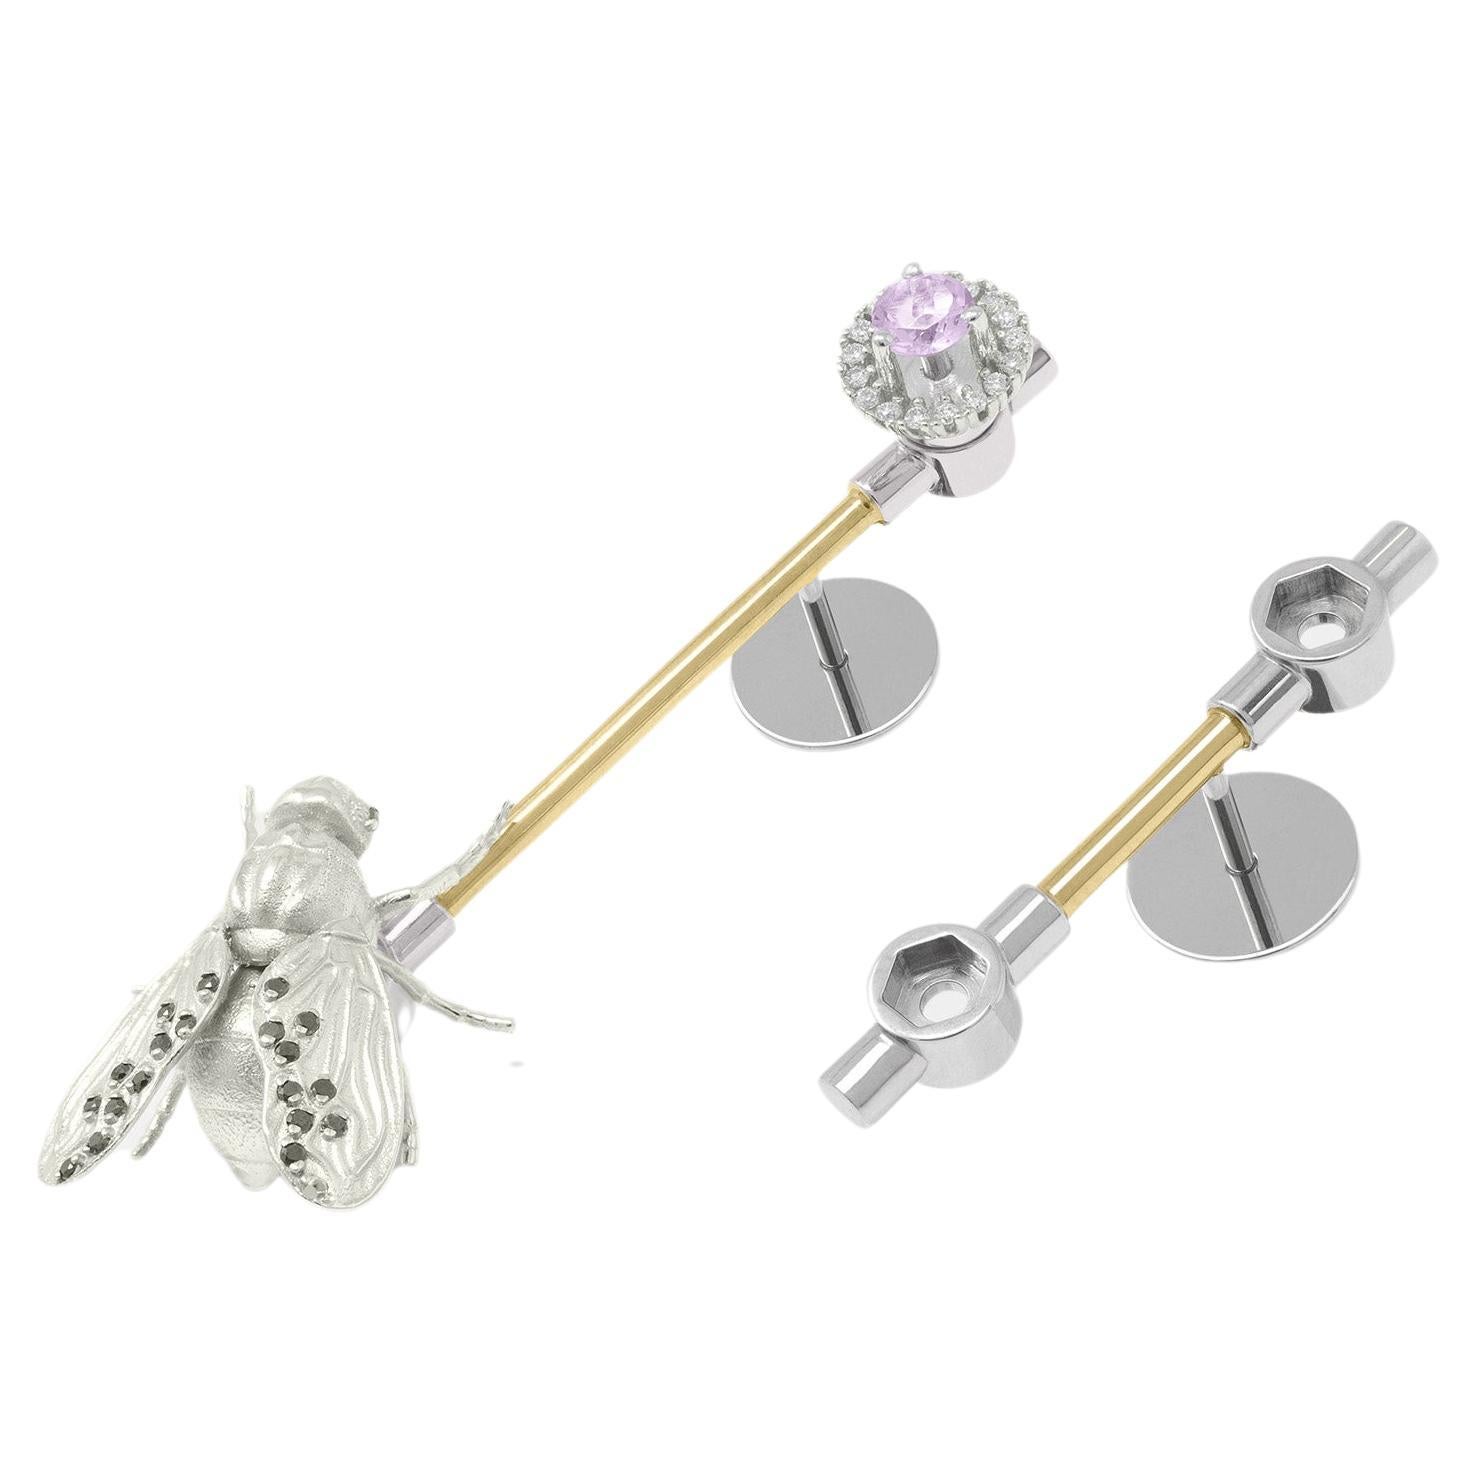 The earrings show a minimal line in yellow gold with a Fly in white gold with black diamonds and a hallo engagement with amethyst and white diamonds.
·Fly white gold 18K with Black Diamonds A (22 units, 1mm Ø)
·Halo Engagement with White Diamonds